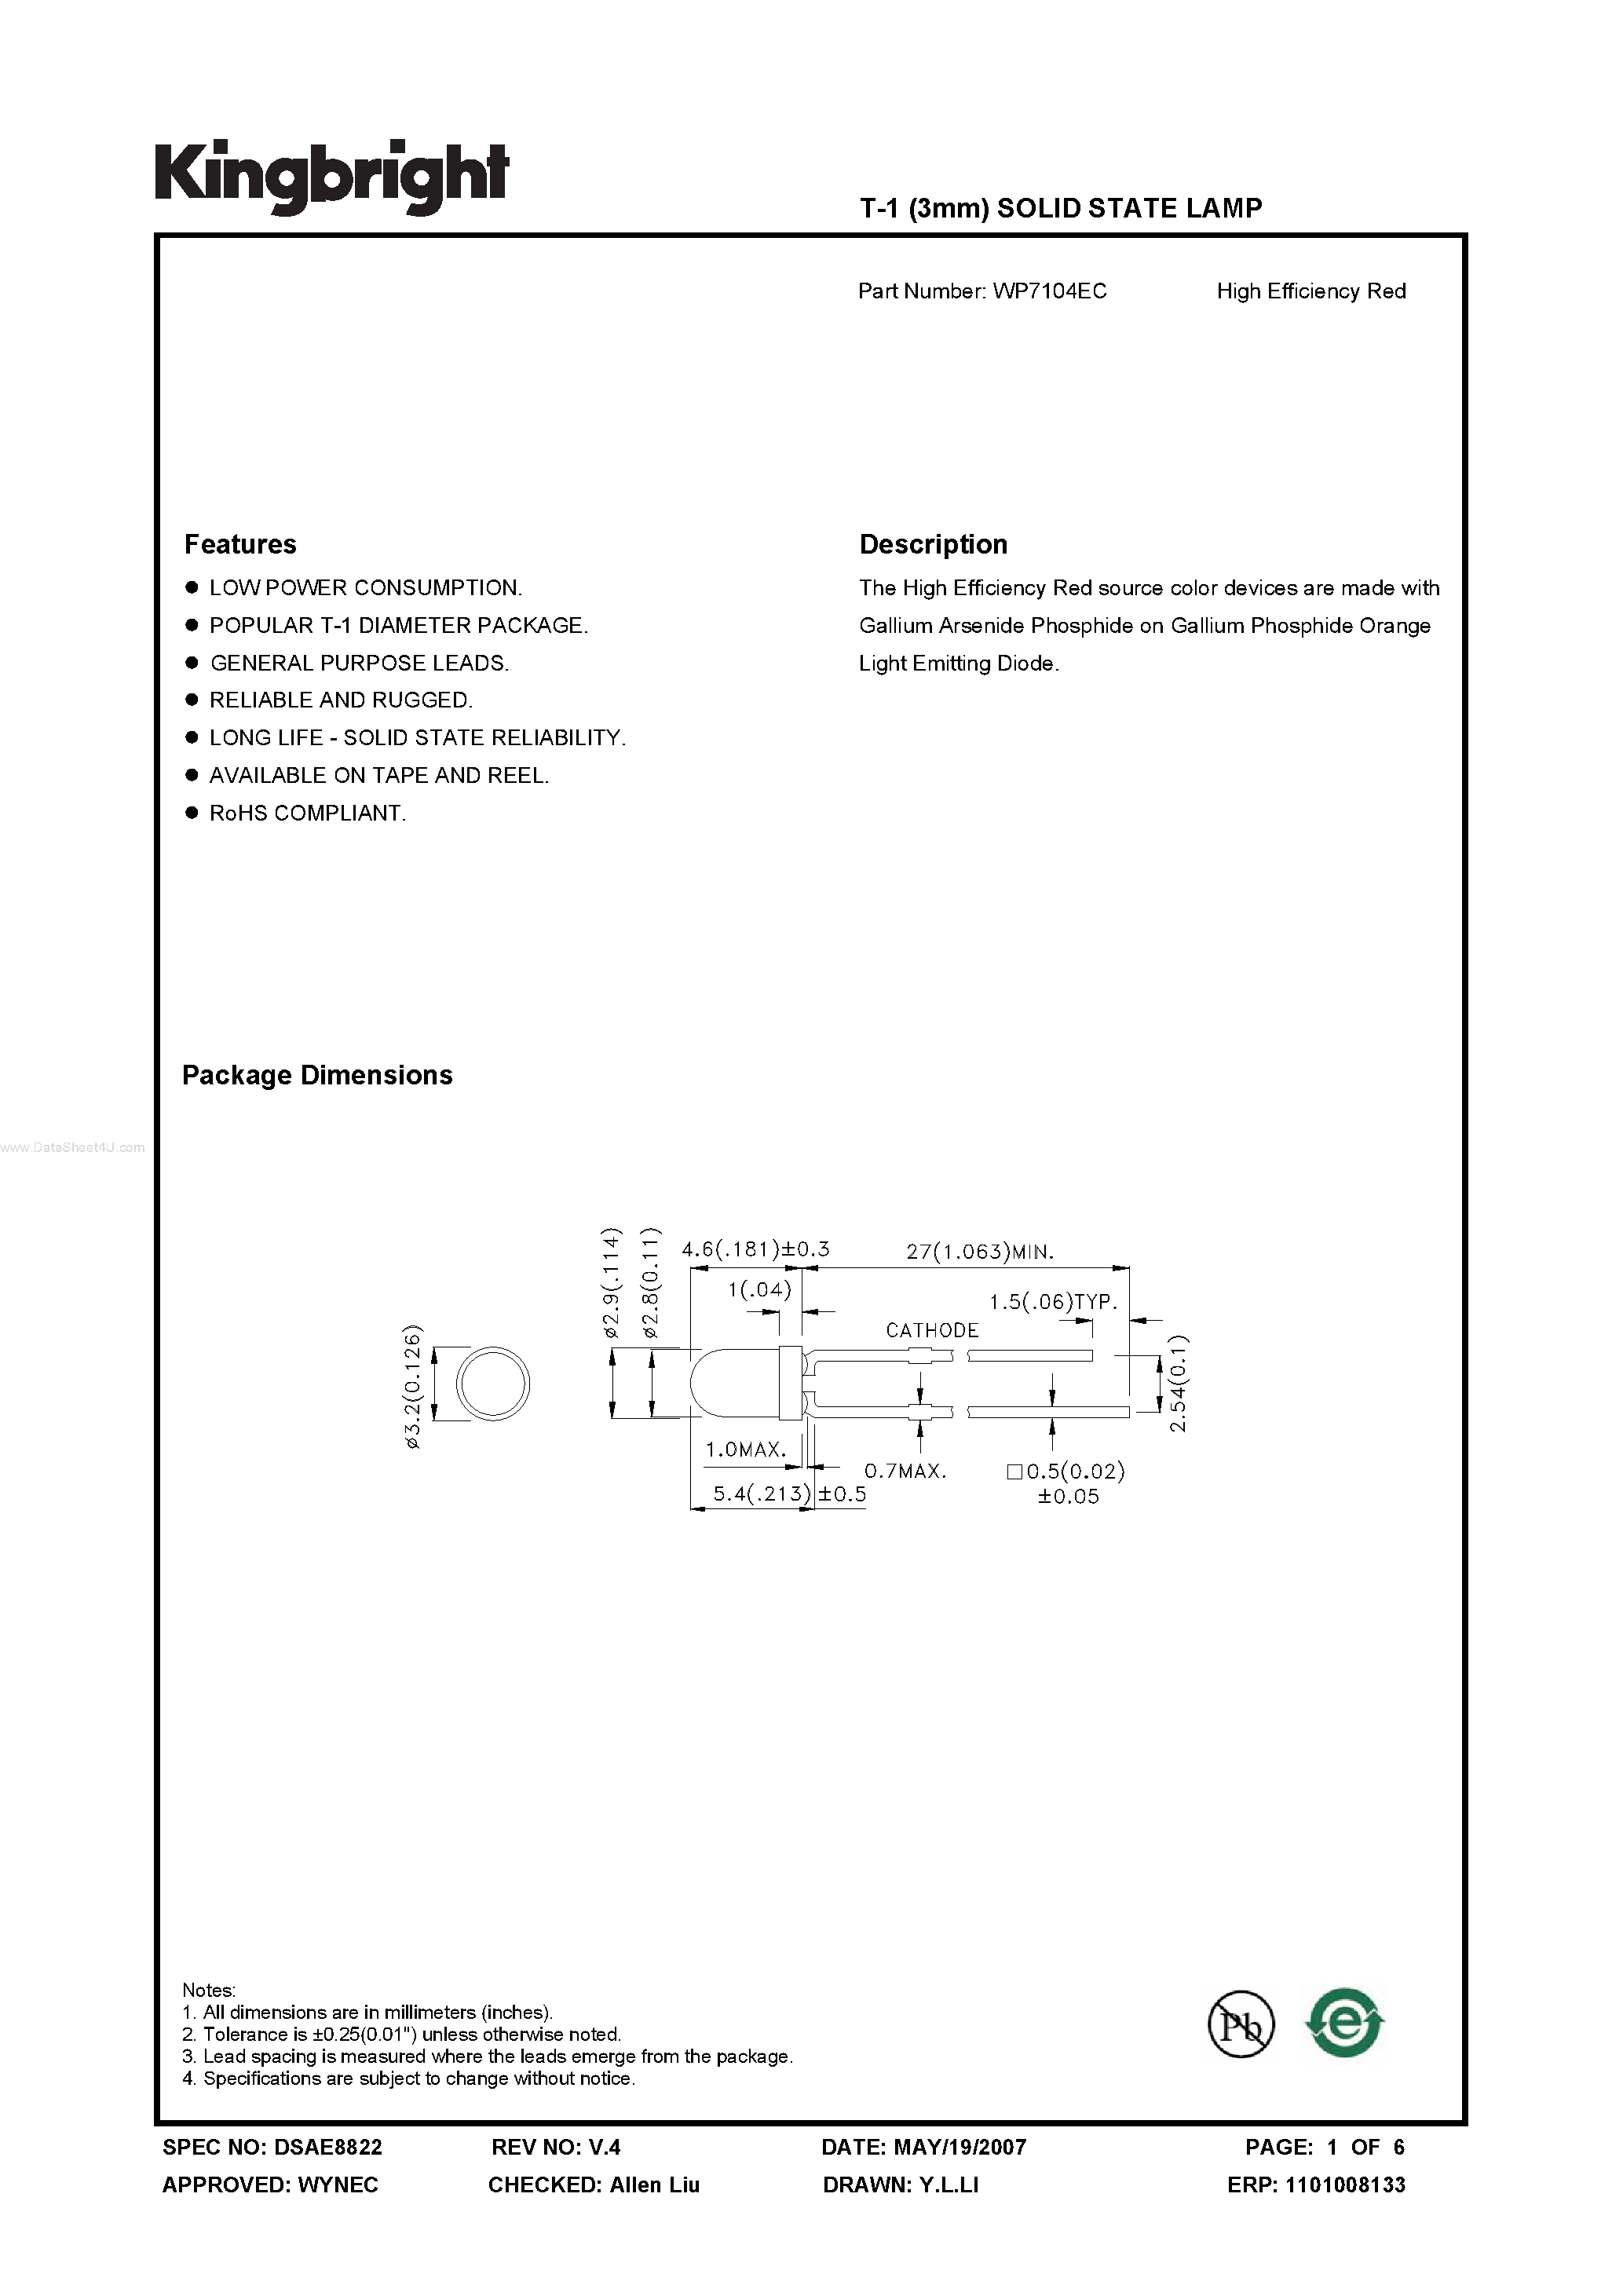 Datasheet WP7104EC - SOLID STATE LAMP page 1